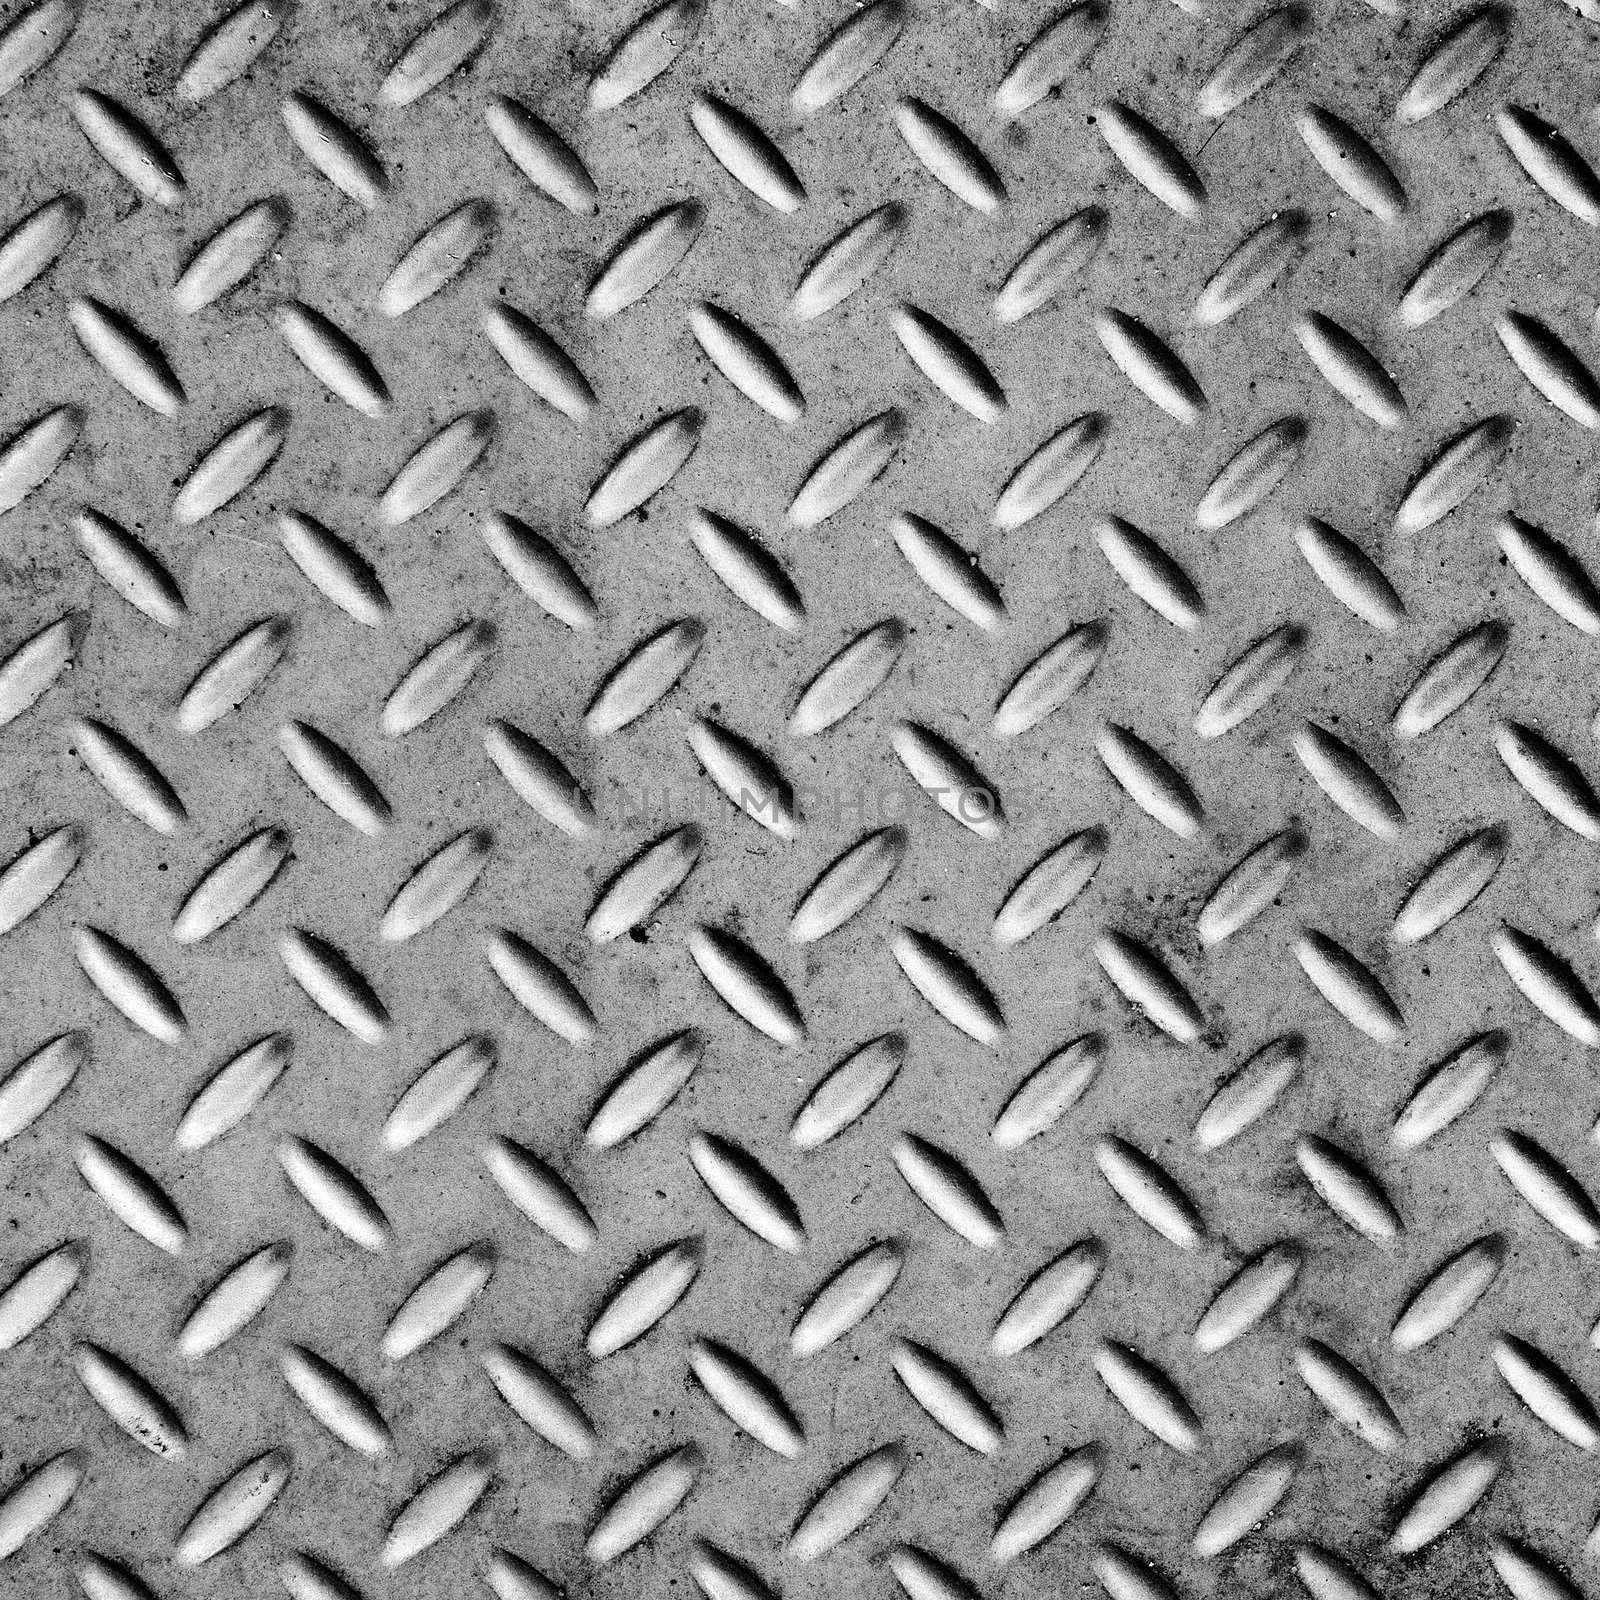 Background of metal diamond plate in silver color.